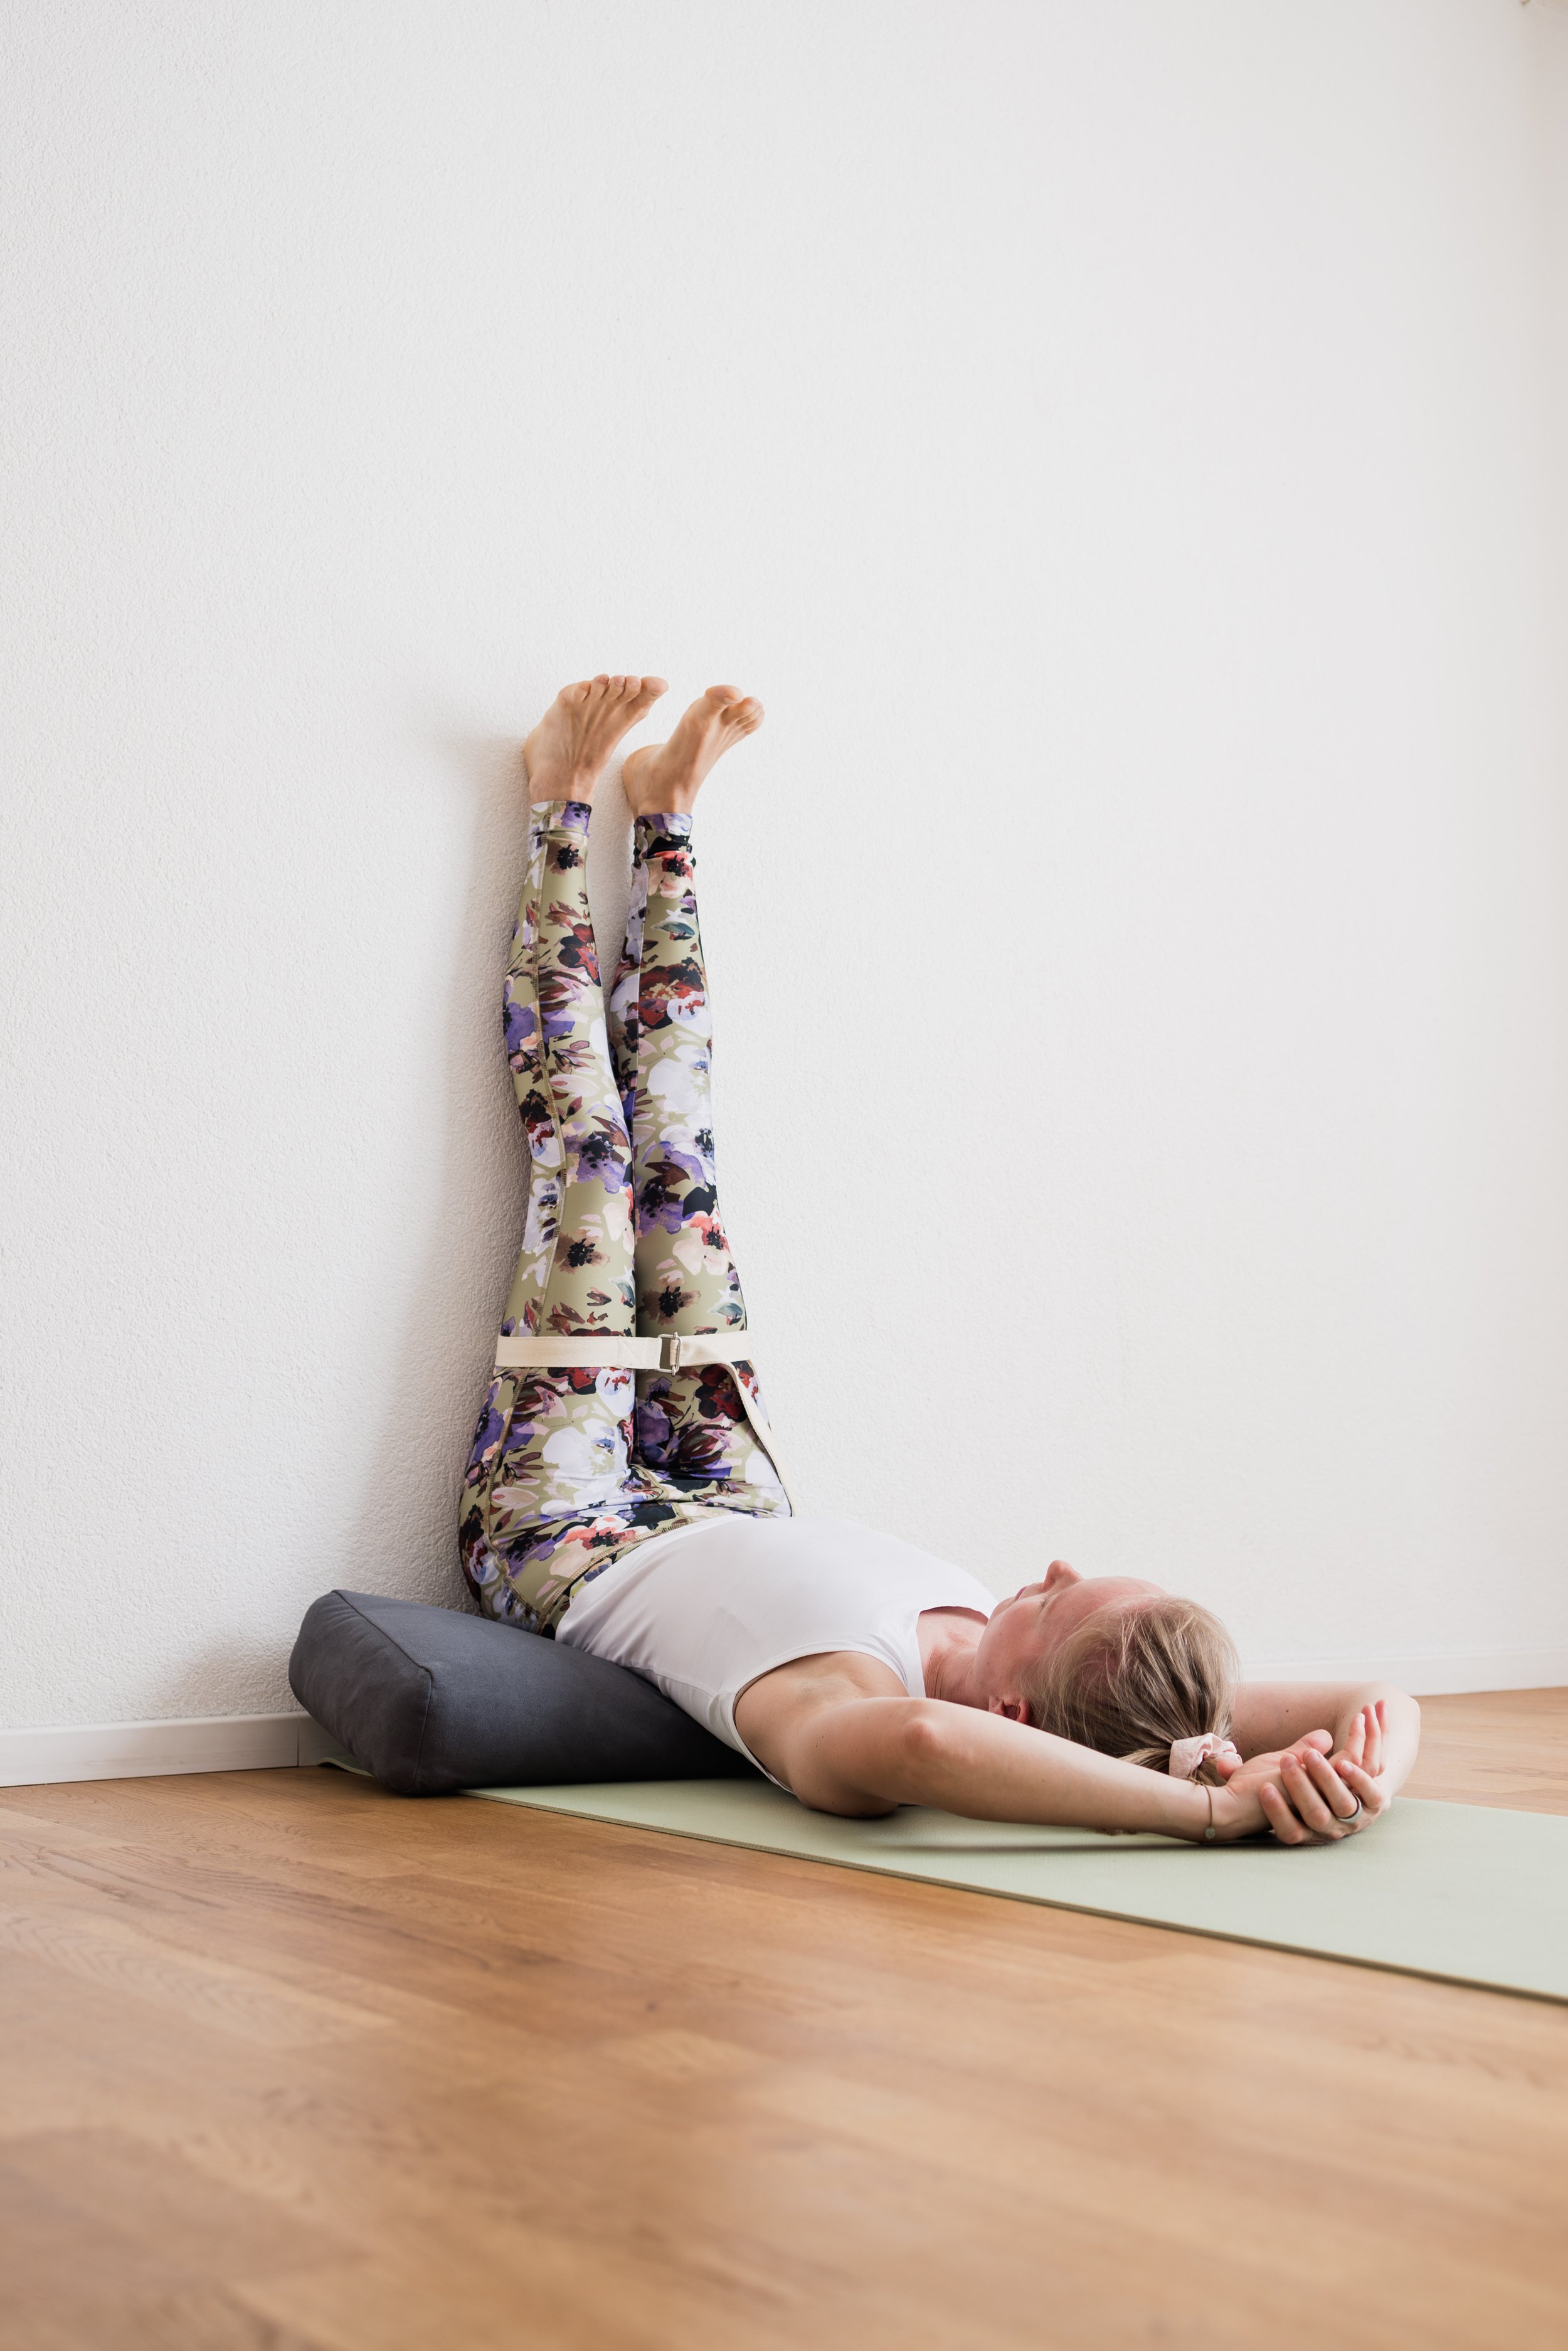 Legs up the Wall: 5 Health Benefits - Yoga with Mikah - Yoga Therapist,  Founder of Lifelong Yoga Online